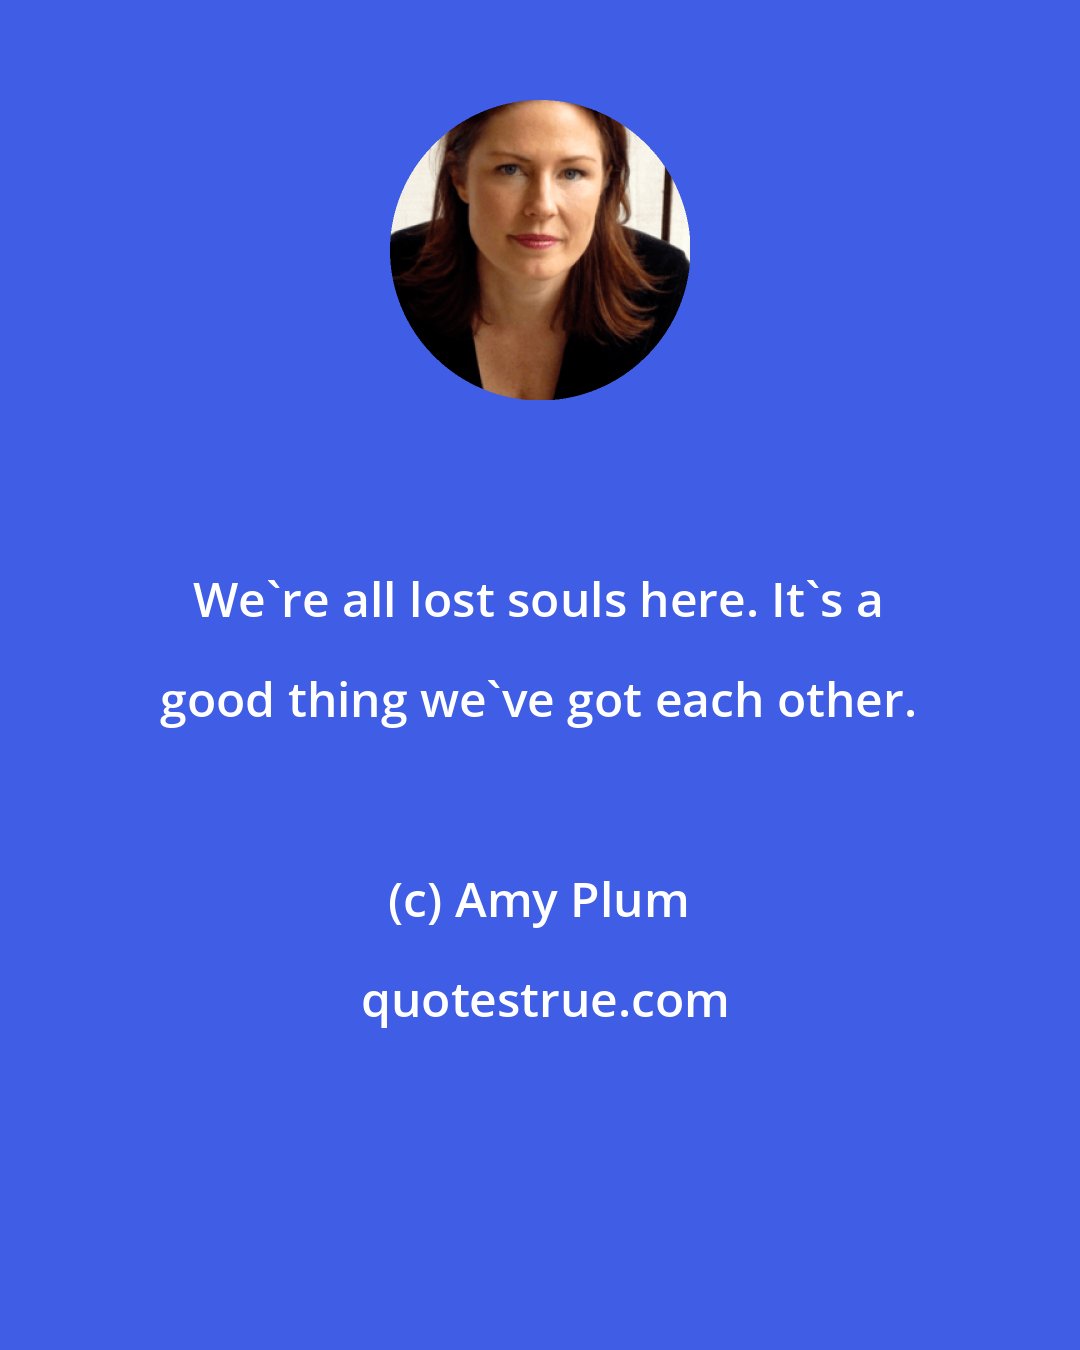 Amy Plum: We're all lost souls here. It's a good thing we've got each other.